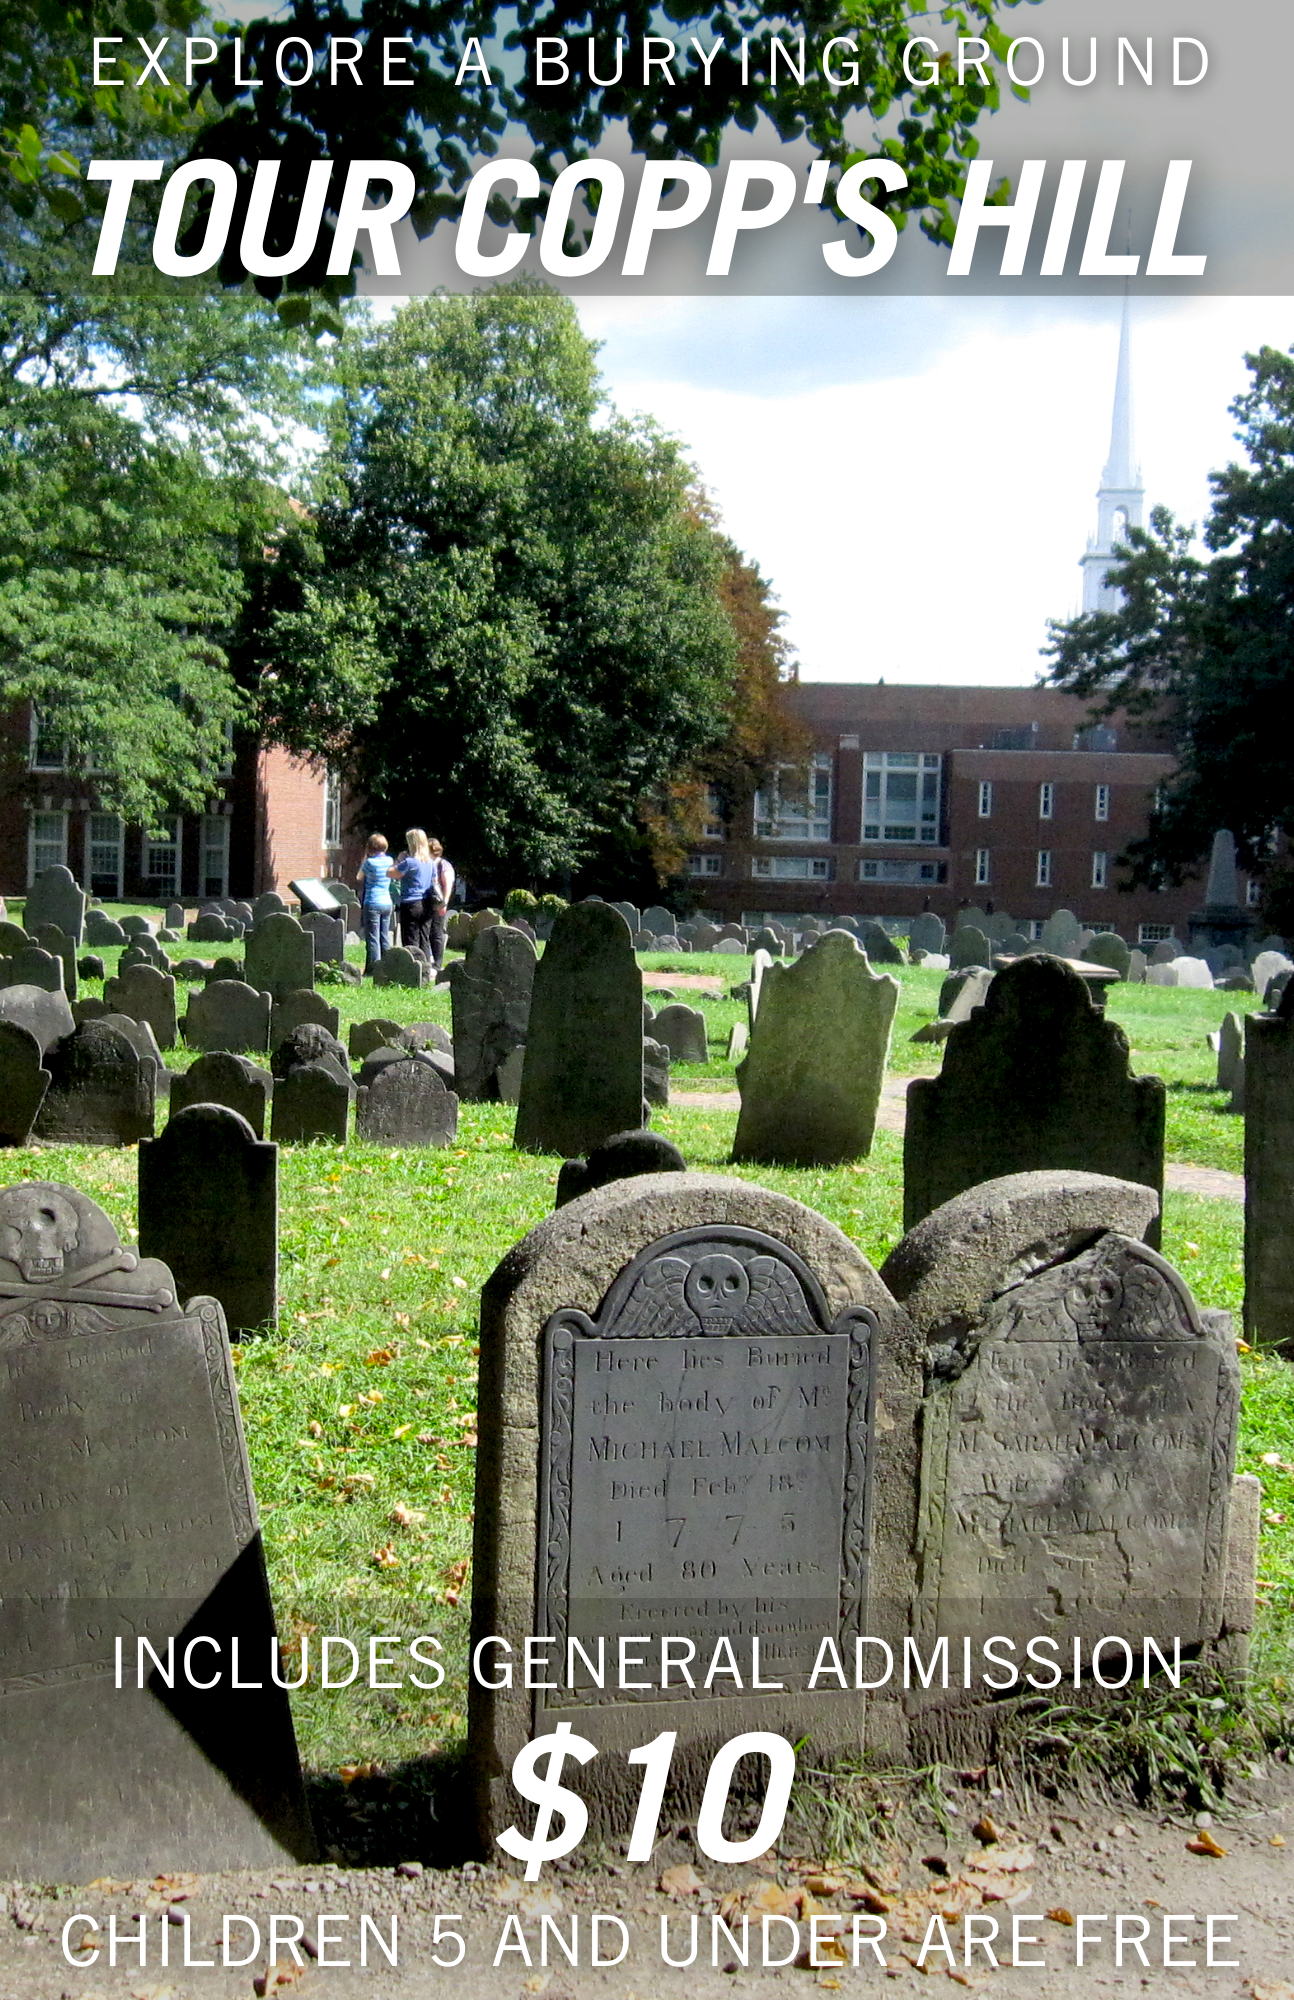 Tour Copp's Hill Burial Ground